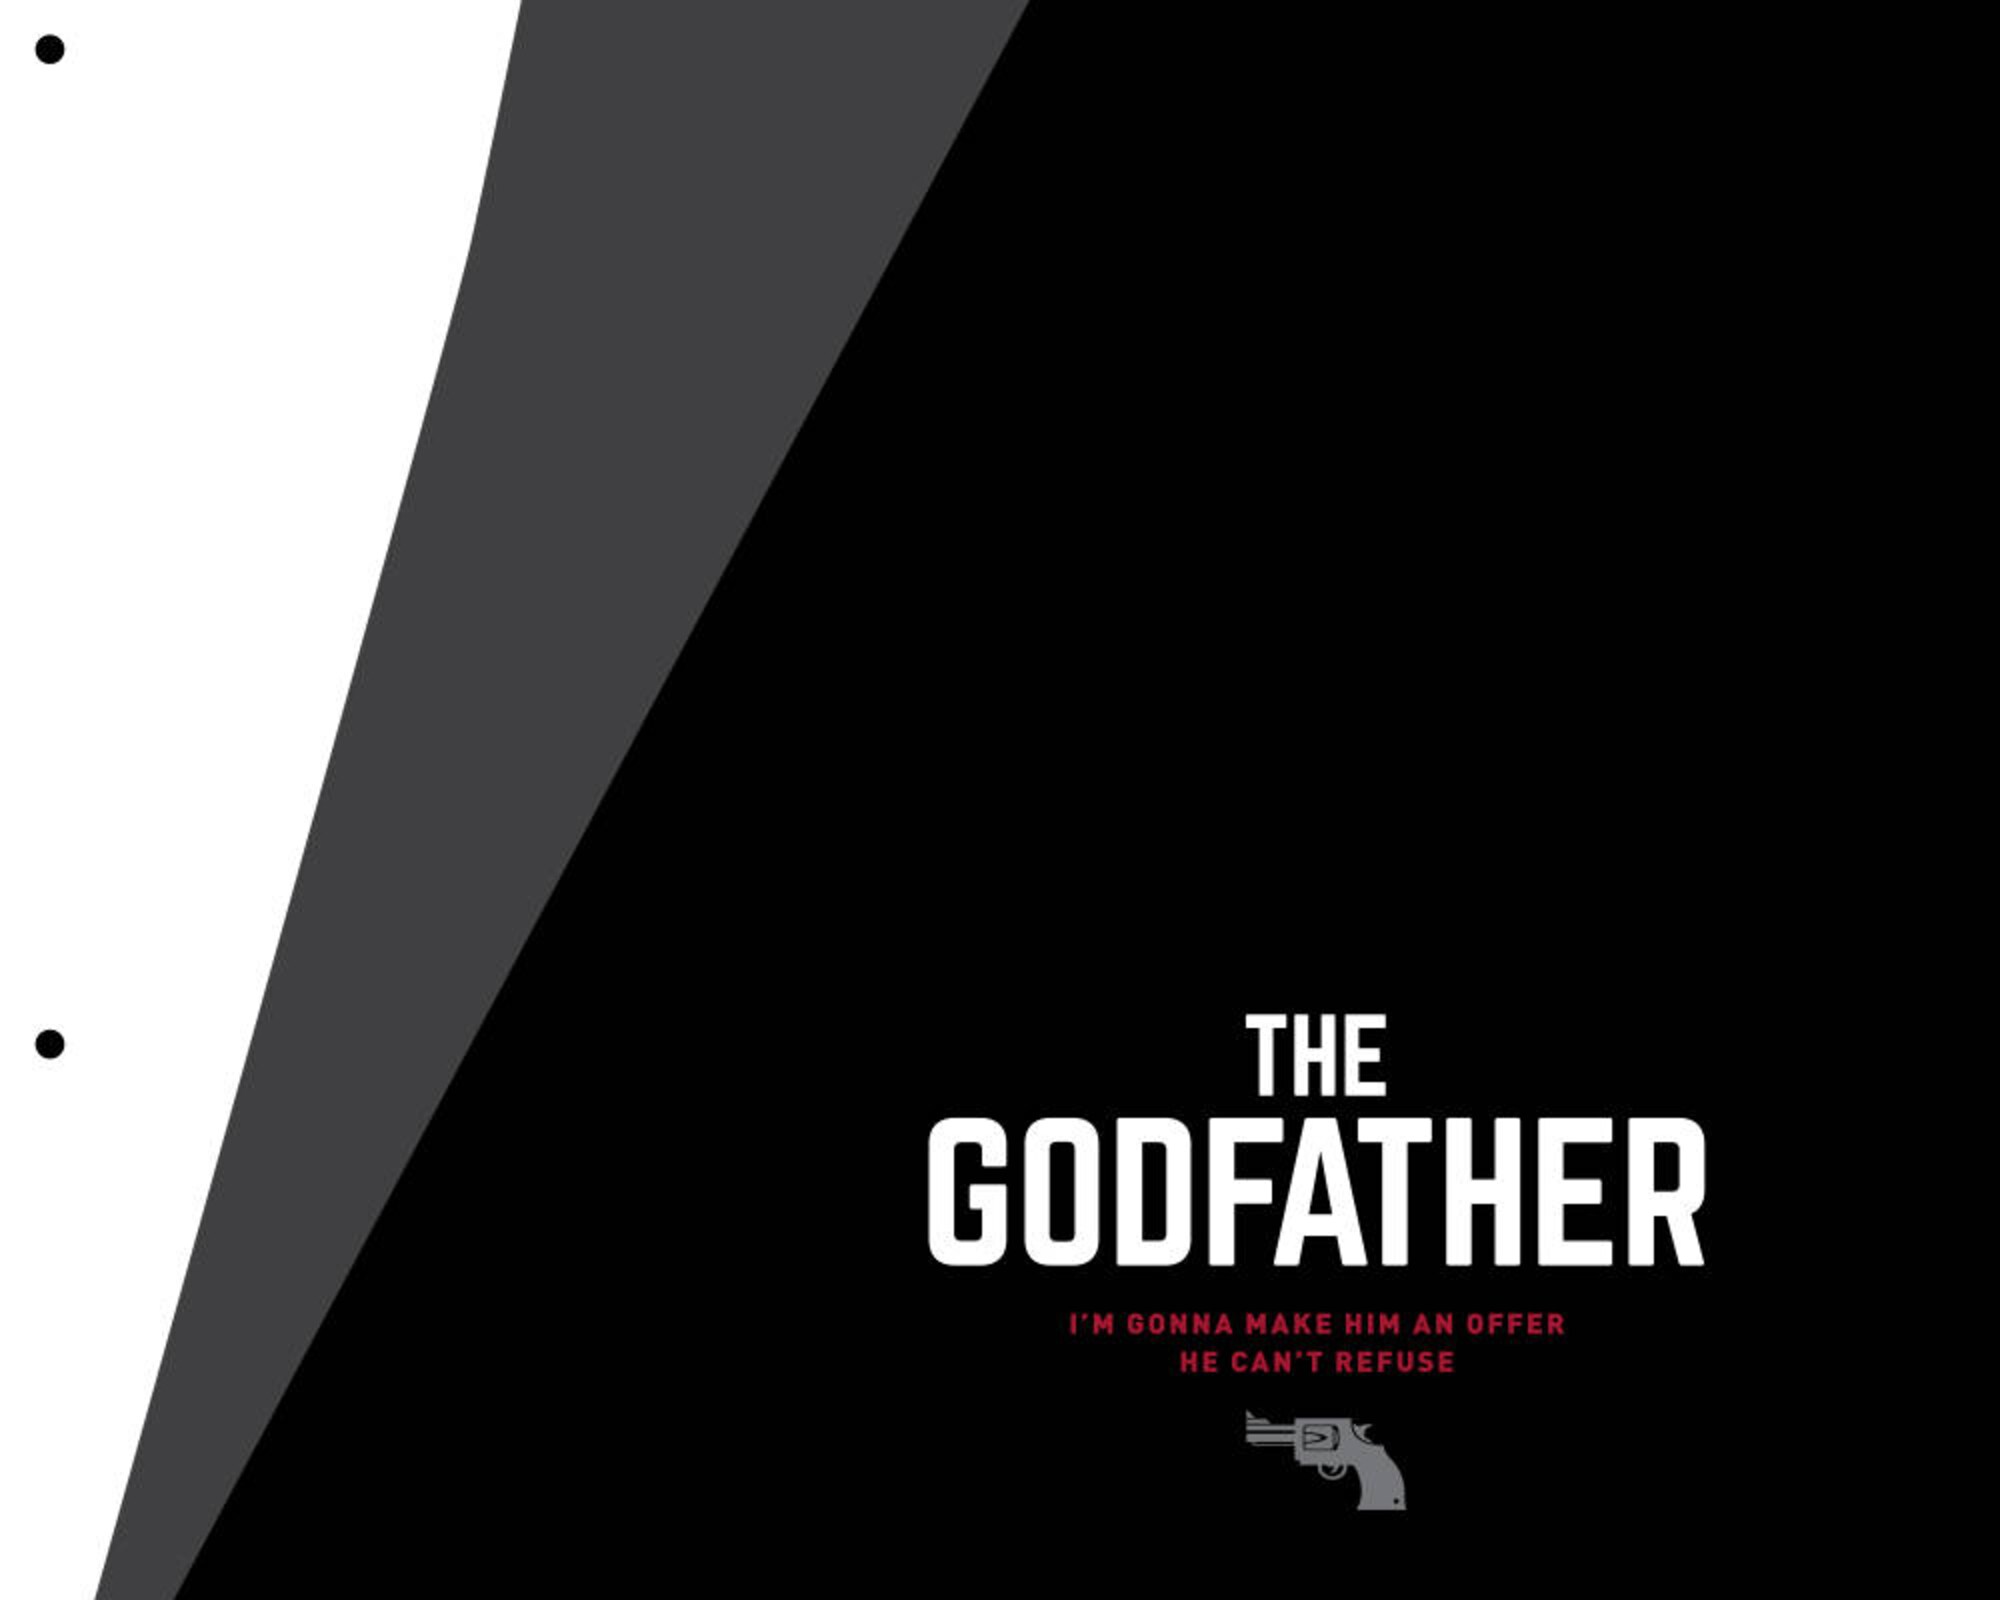 The Godfather - A3 movie poster, film poster, minimal, minimalist movie poster